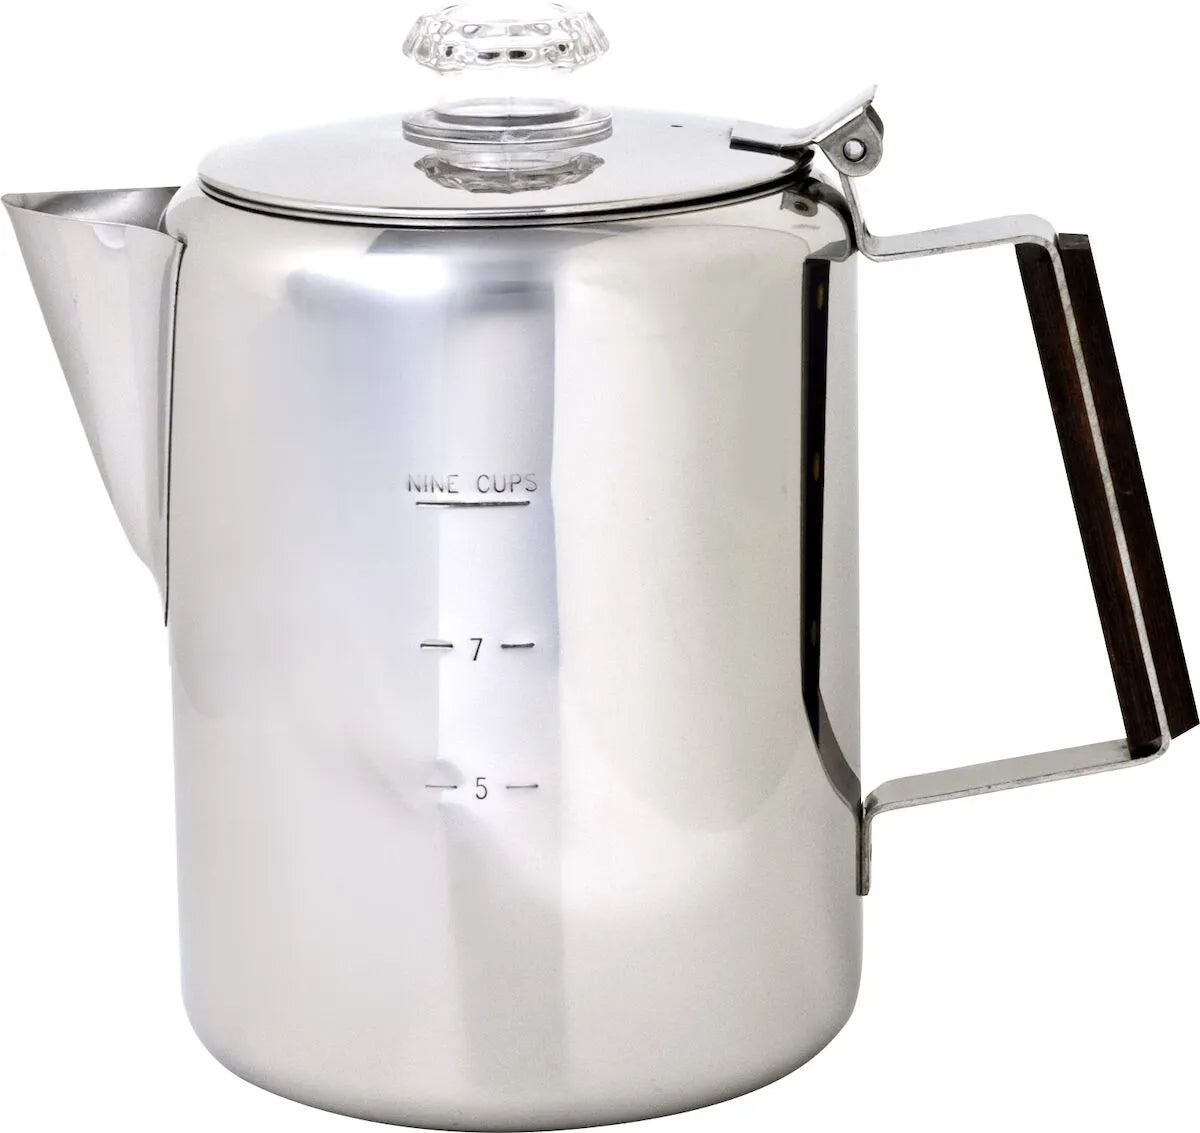 Timberline Stainless Steel Percolator - 9 Cups